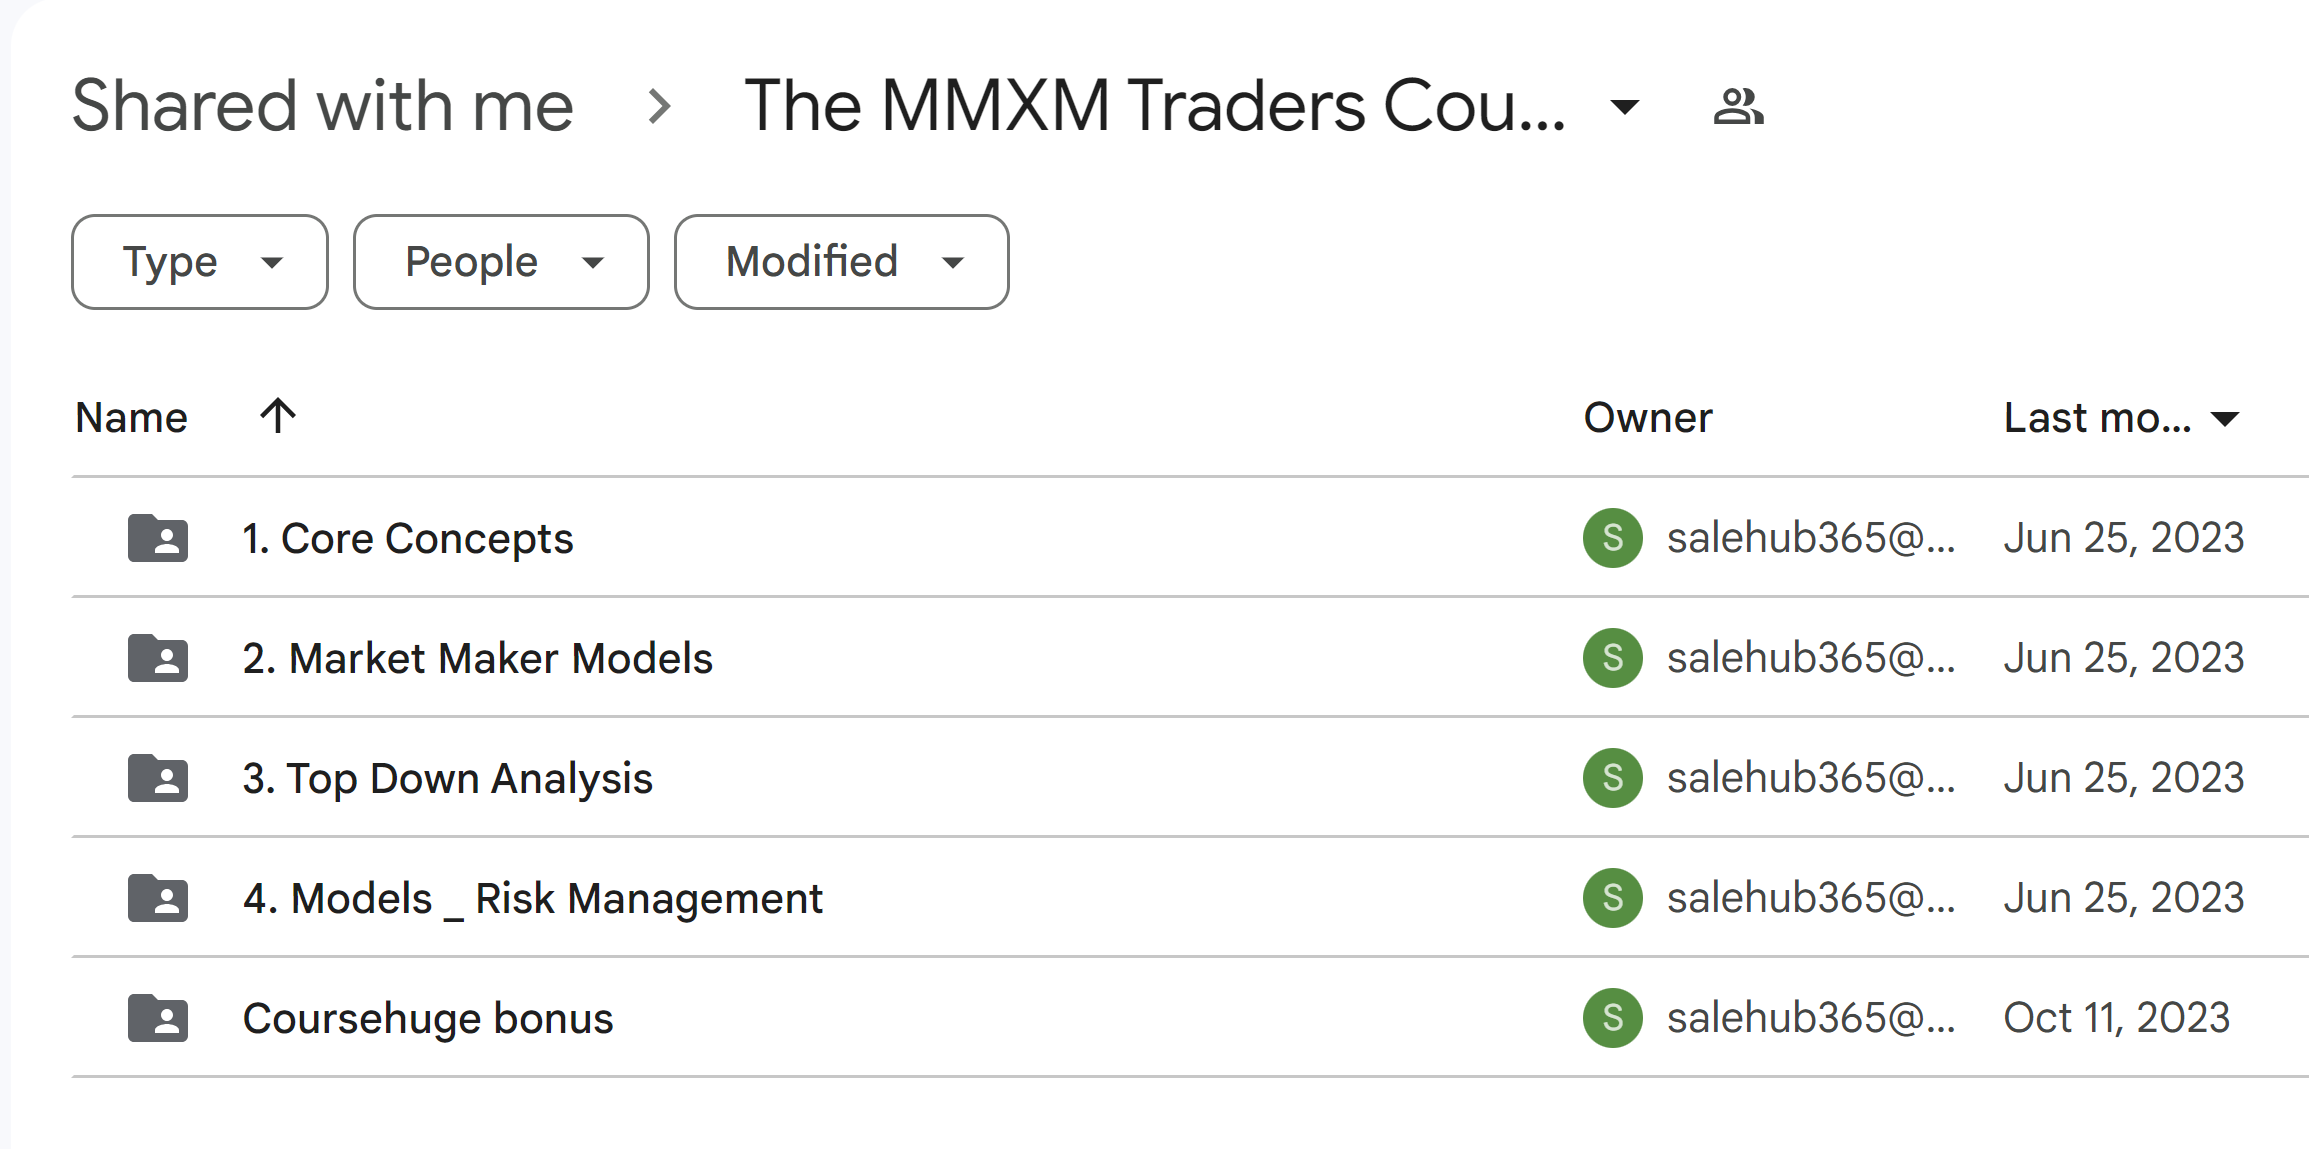 The Mmxm Traders Course 2023